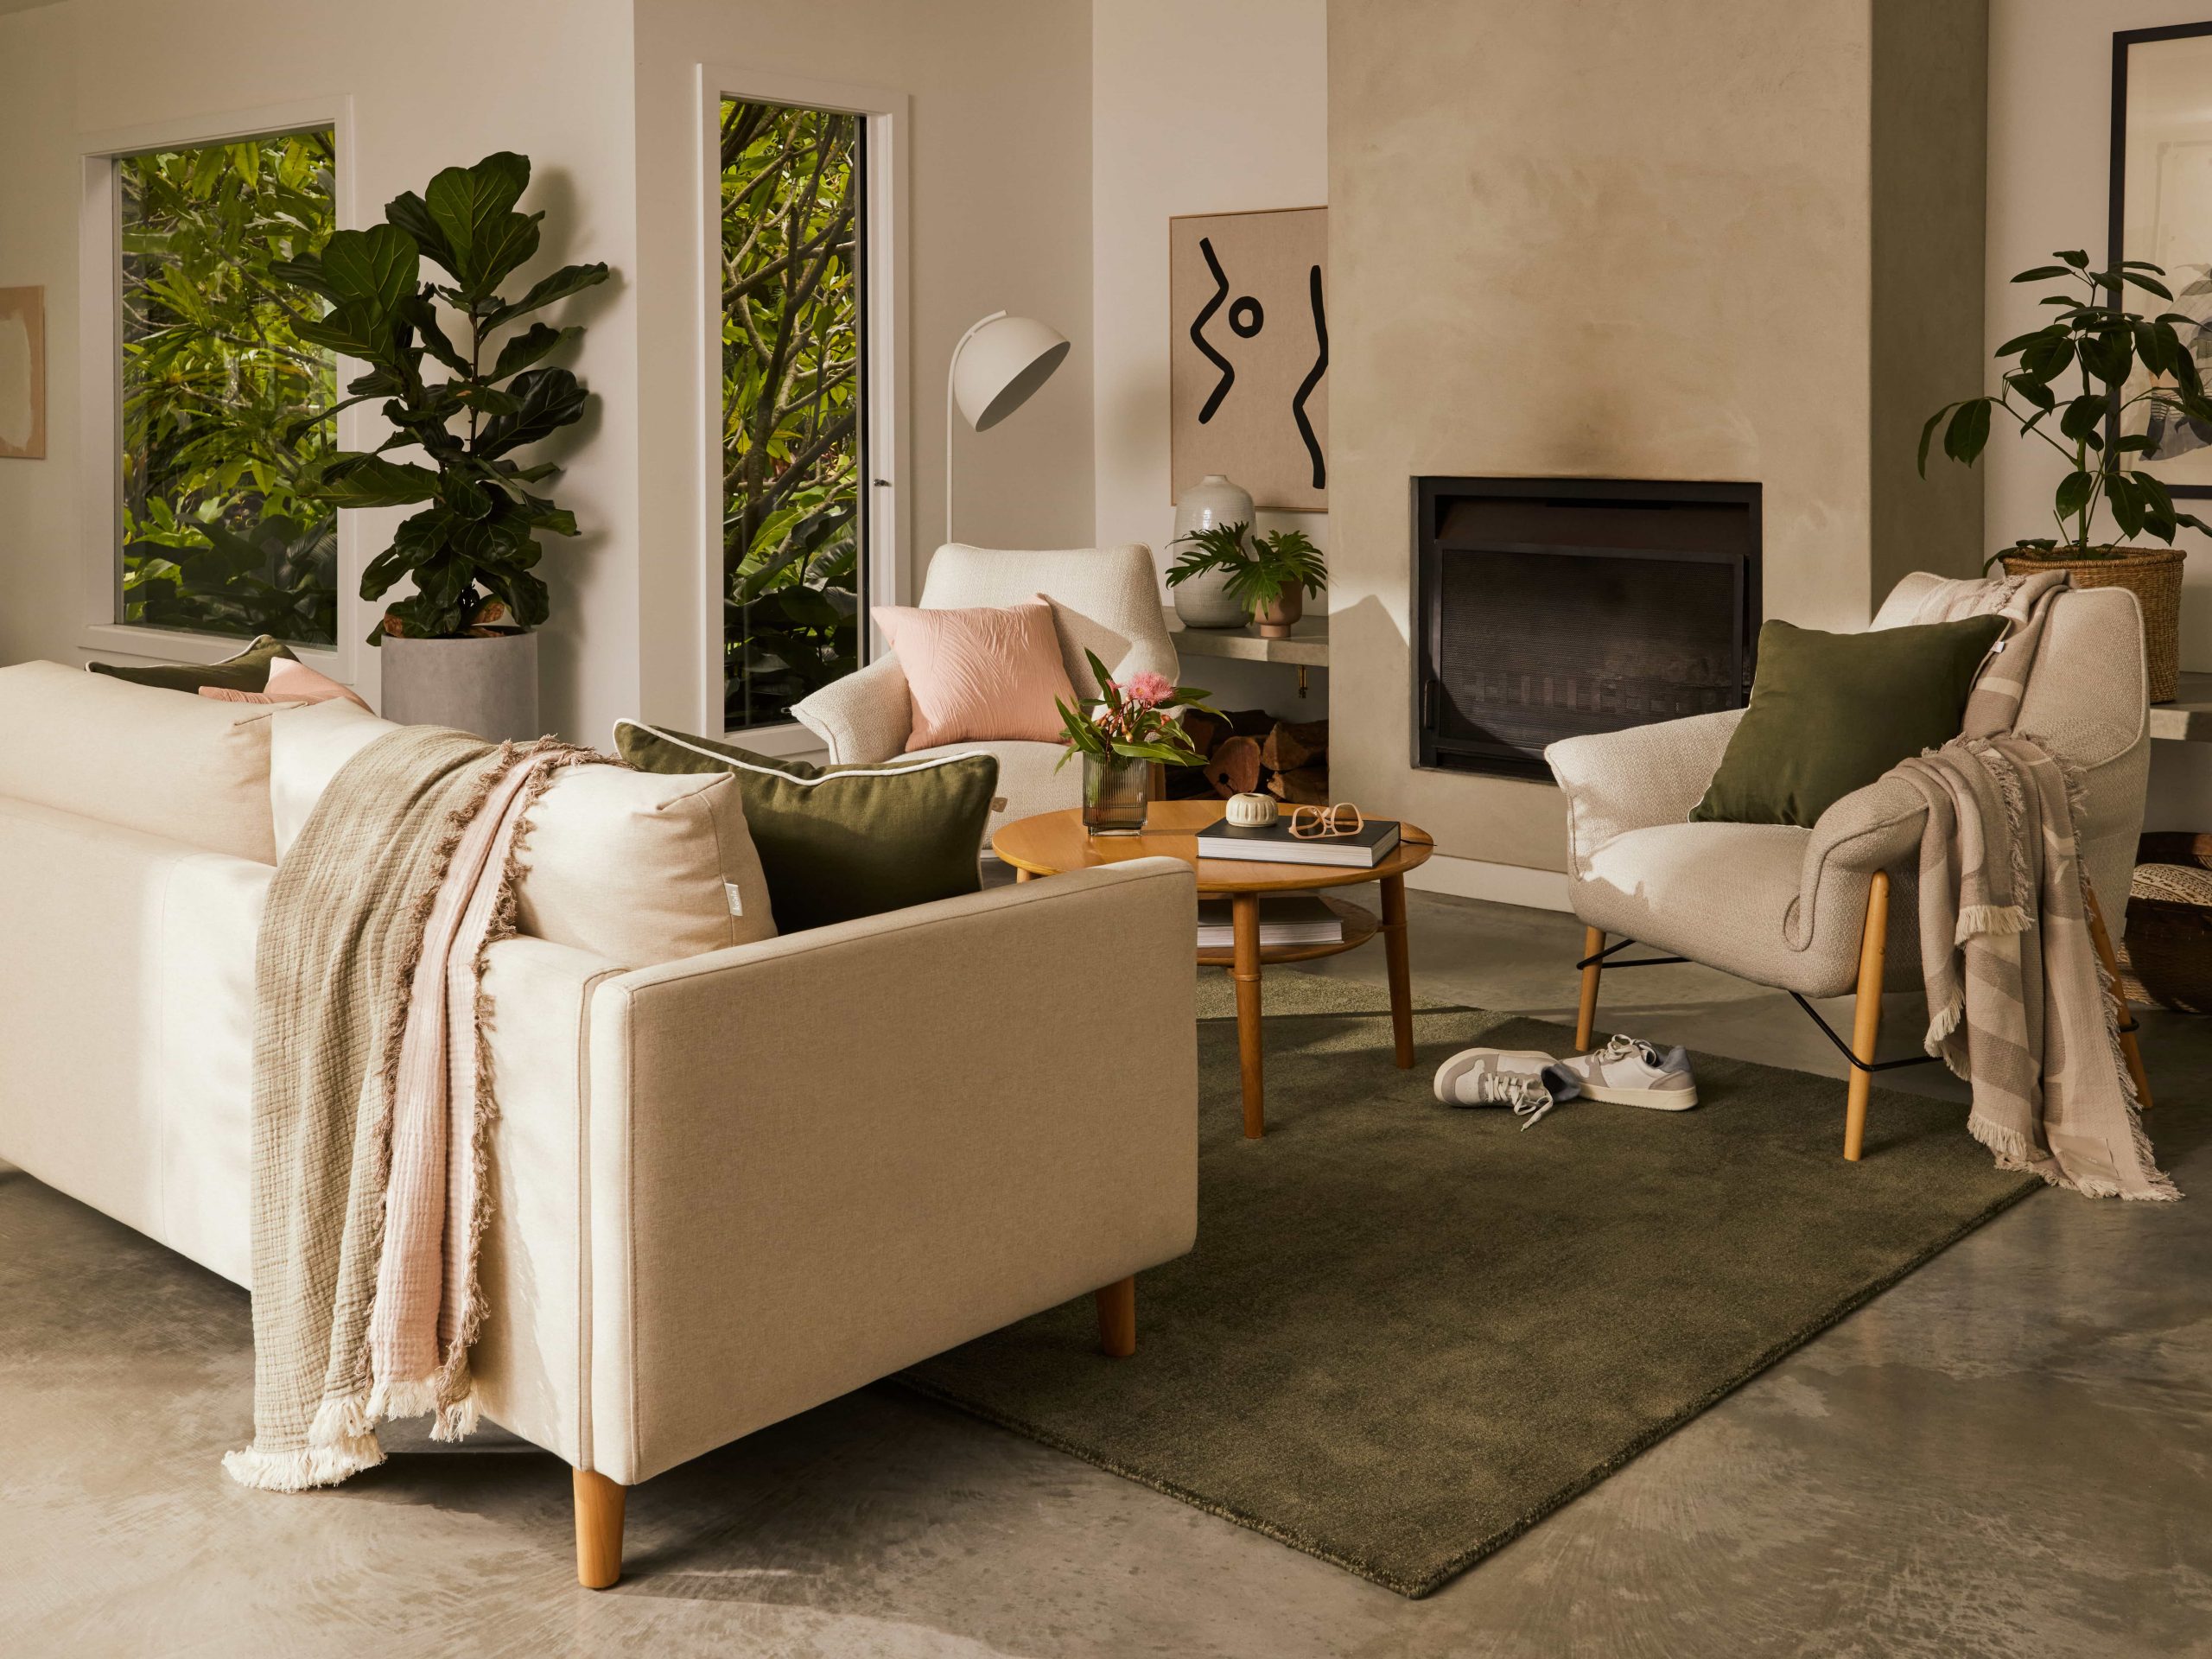 Explore our unique range of Cushions, Throws and Rugs